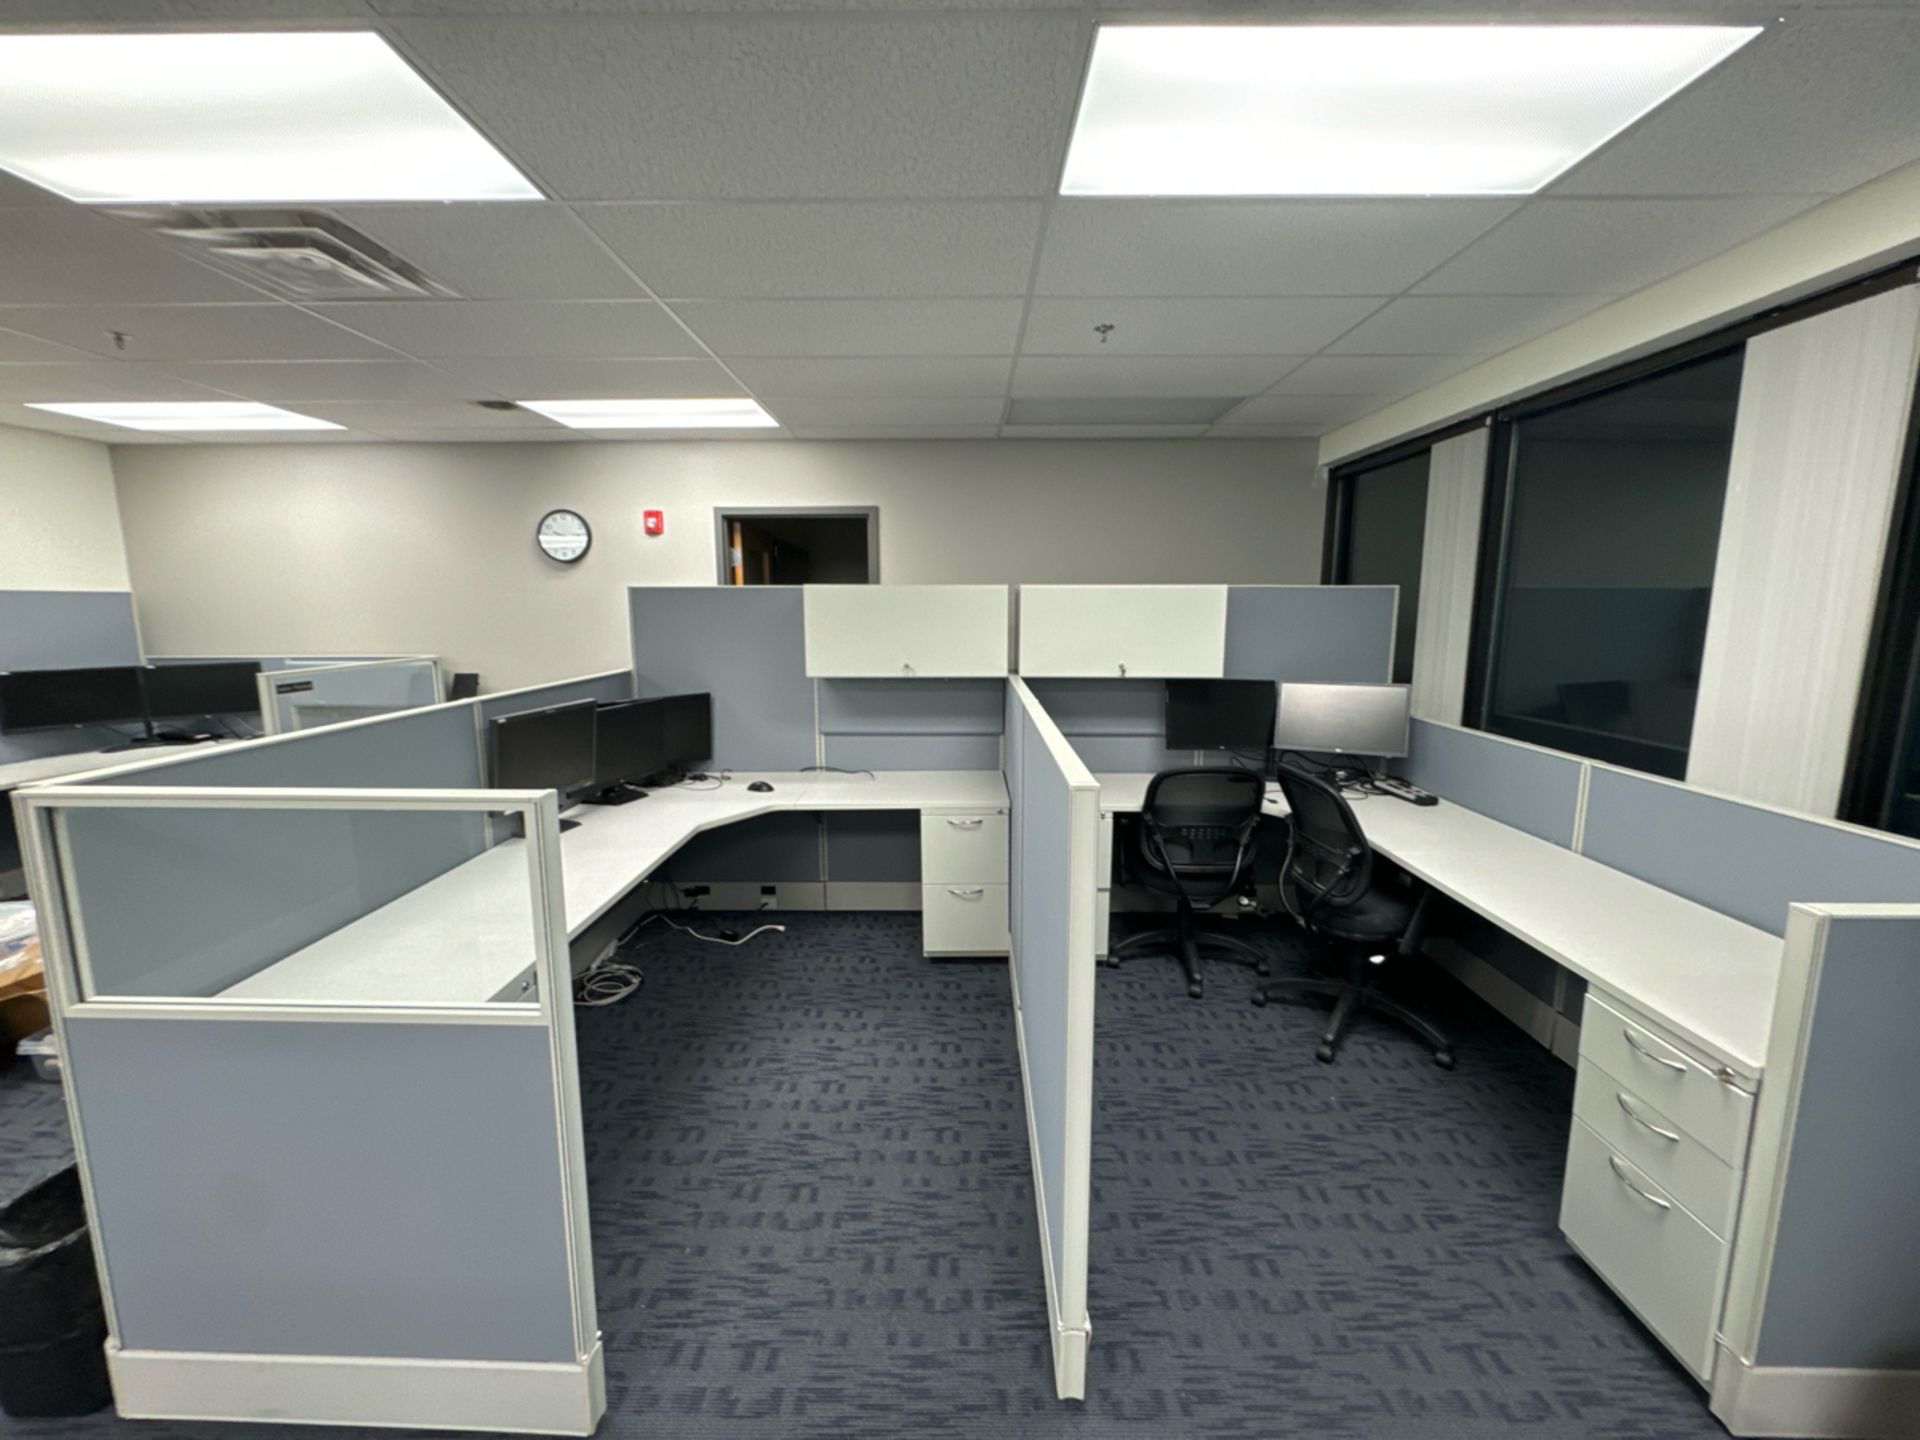 (24) Panel System Work Stations (Contents not Included) - Image 23 of 25